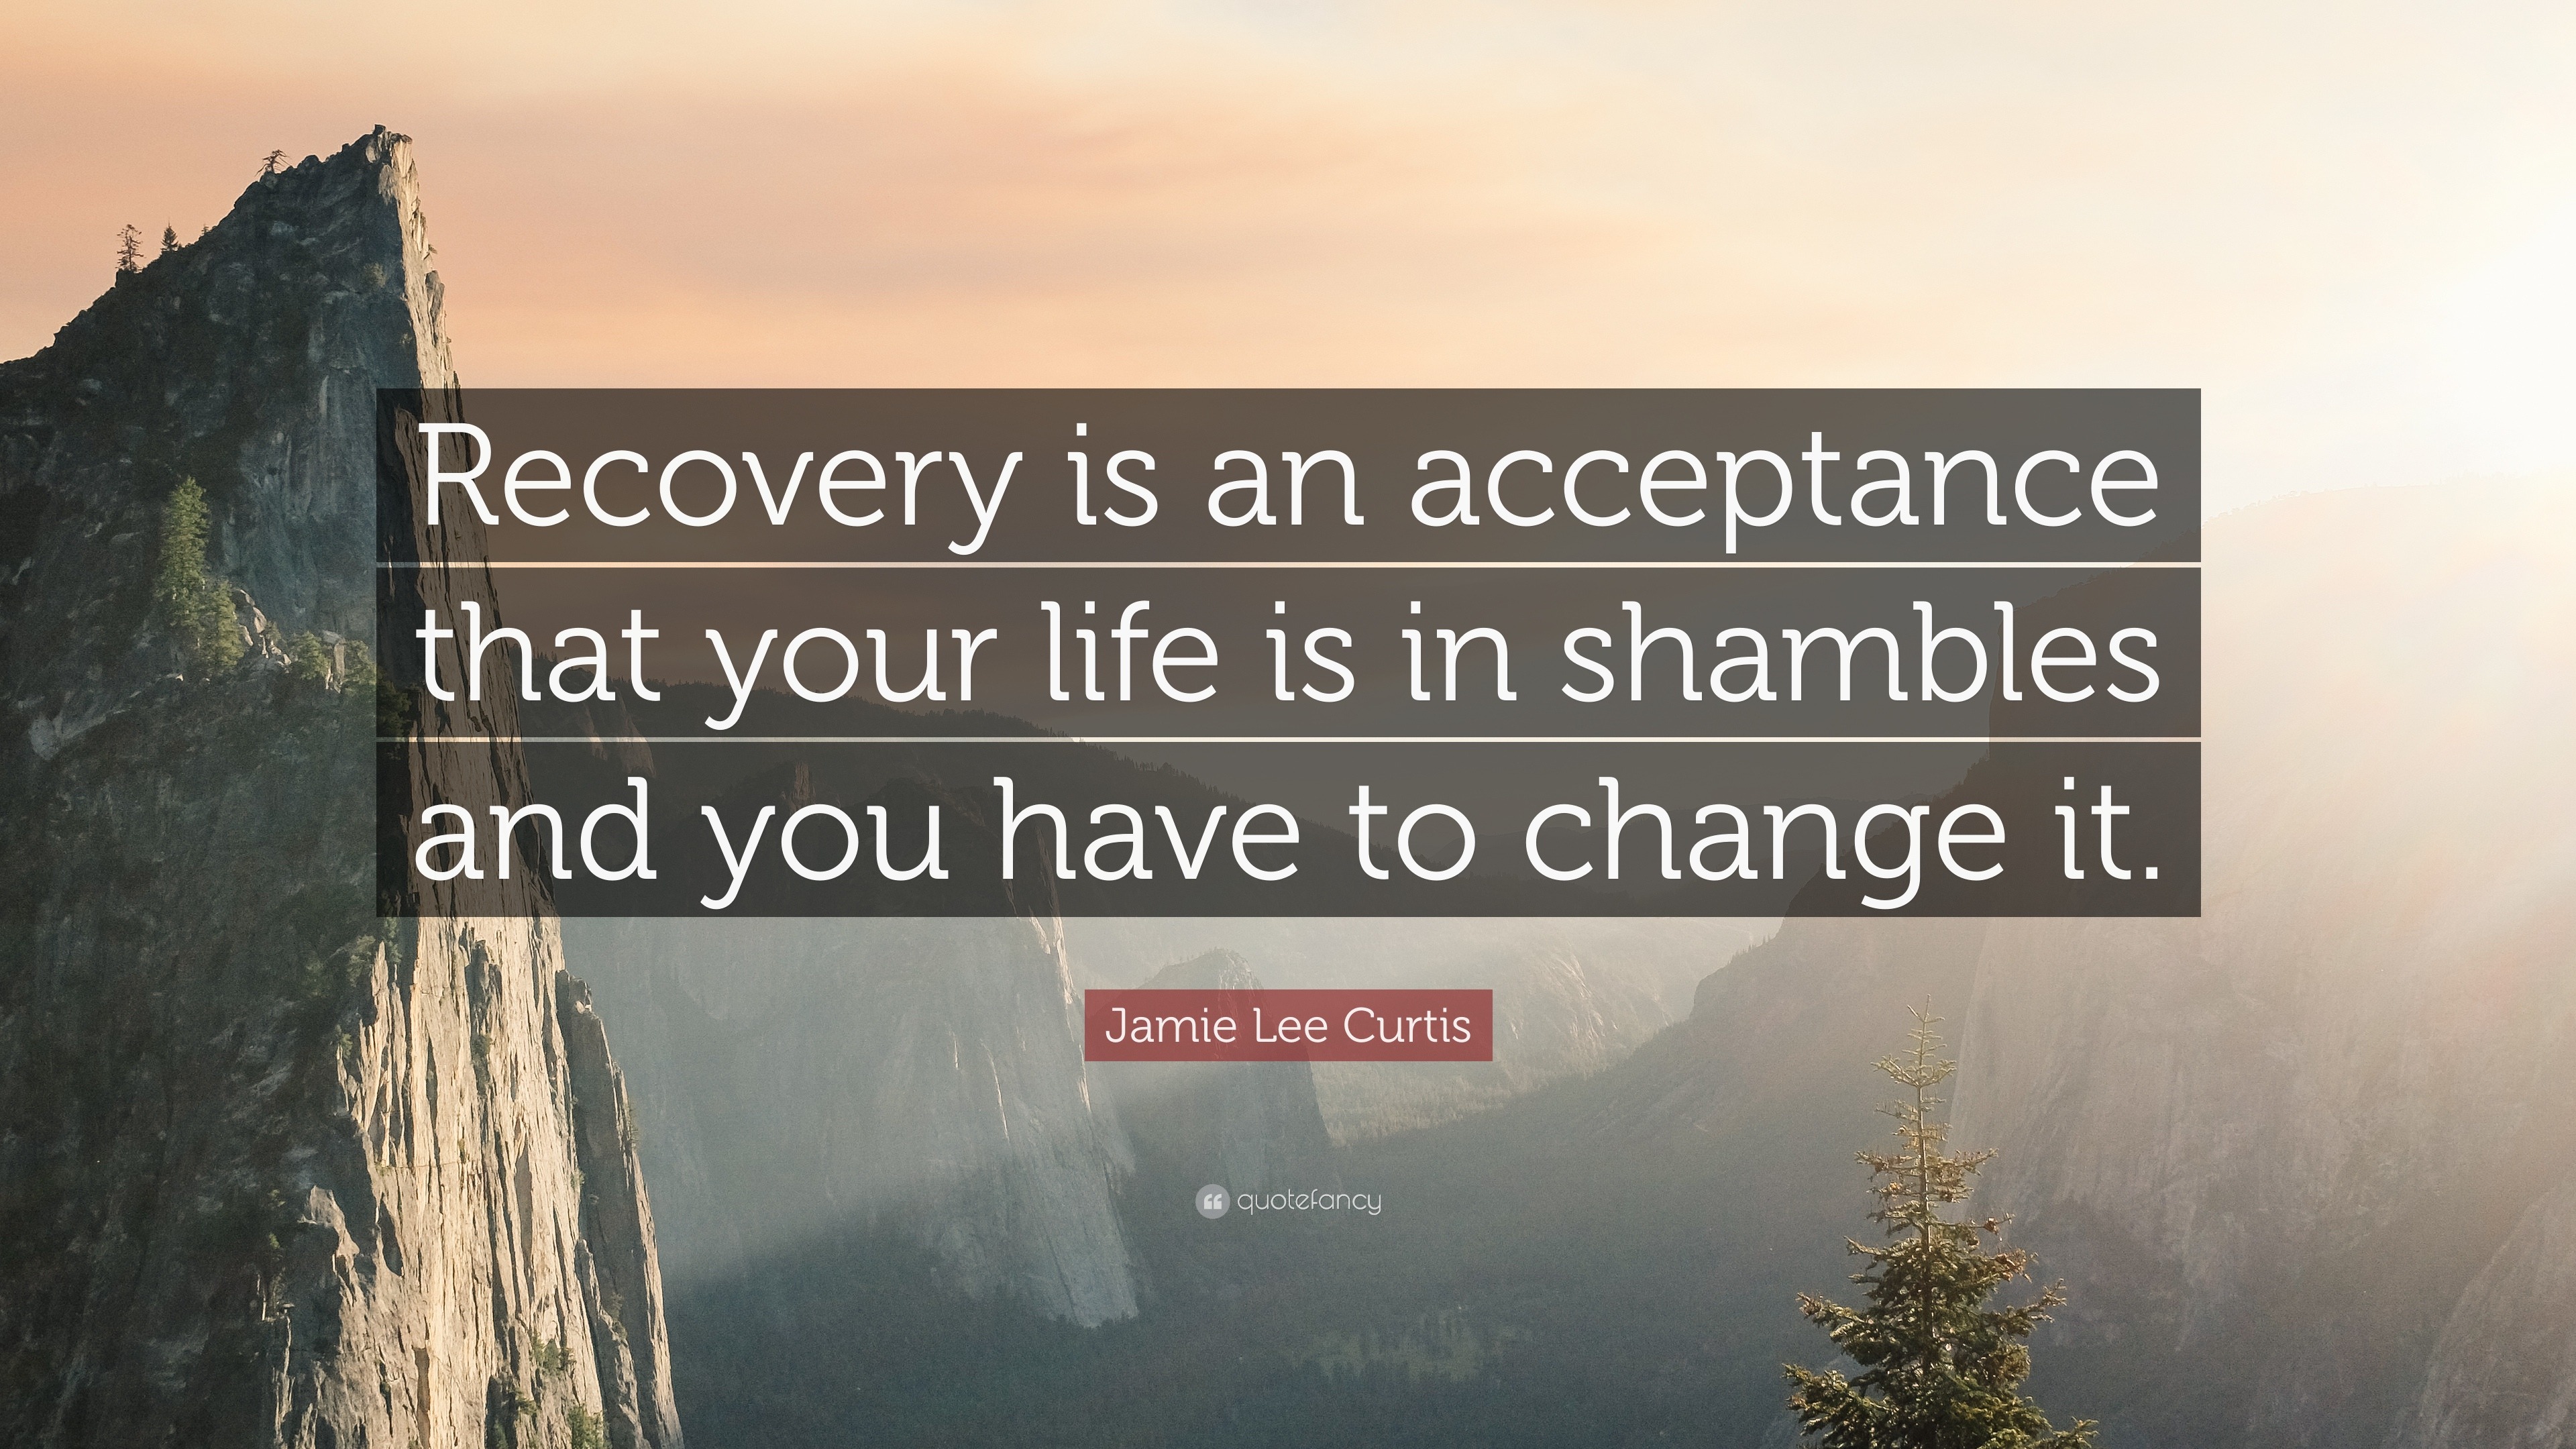 Jamie Lee Curtis Quote: “Recovery is an acceptance that your life is in